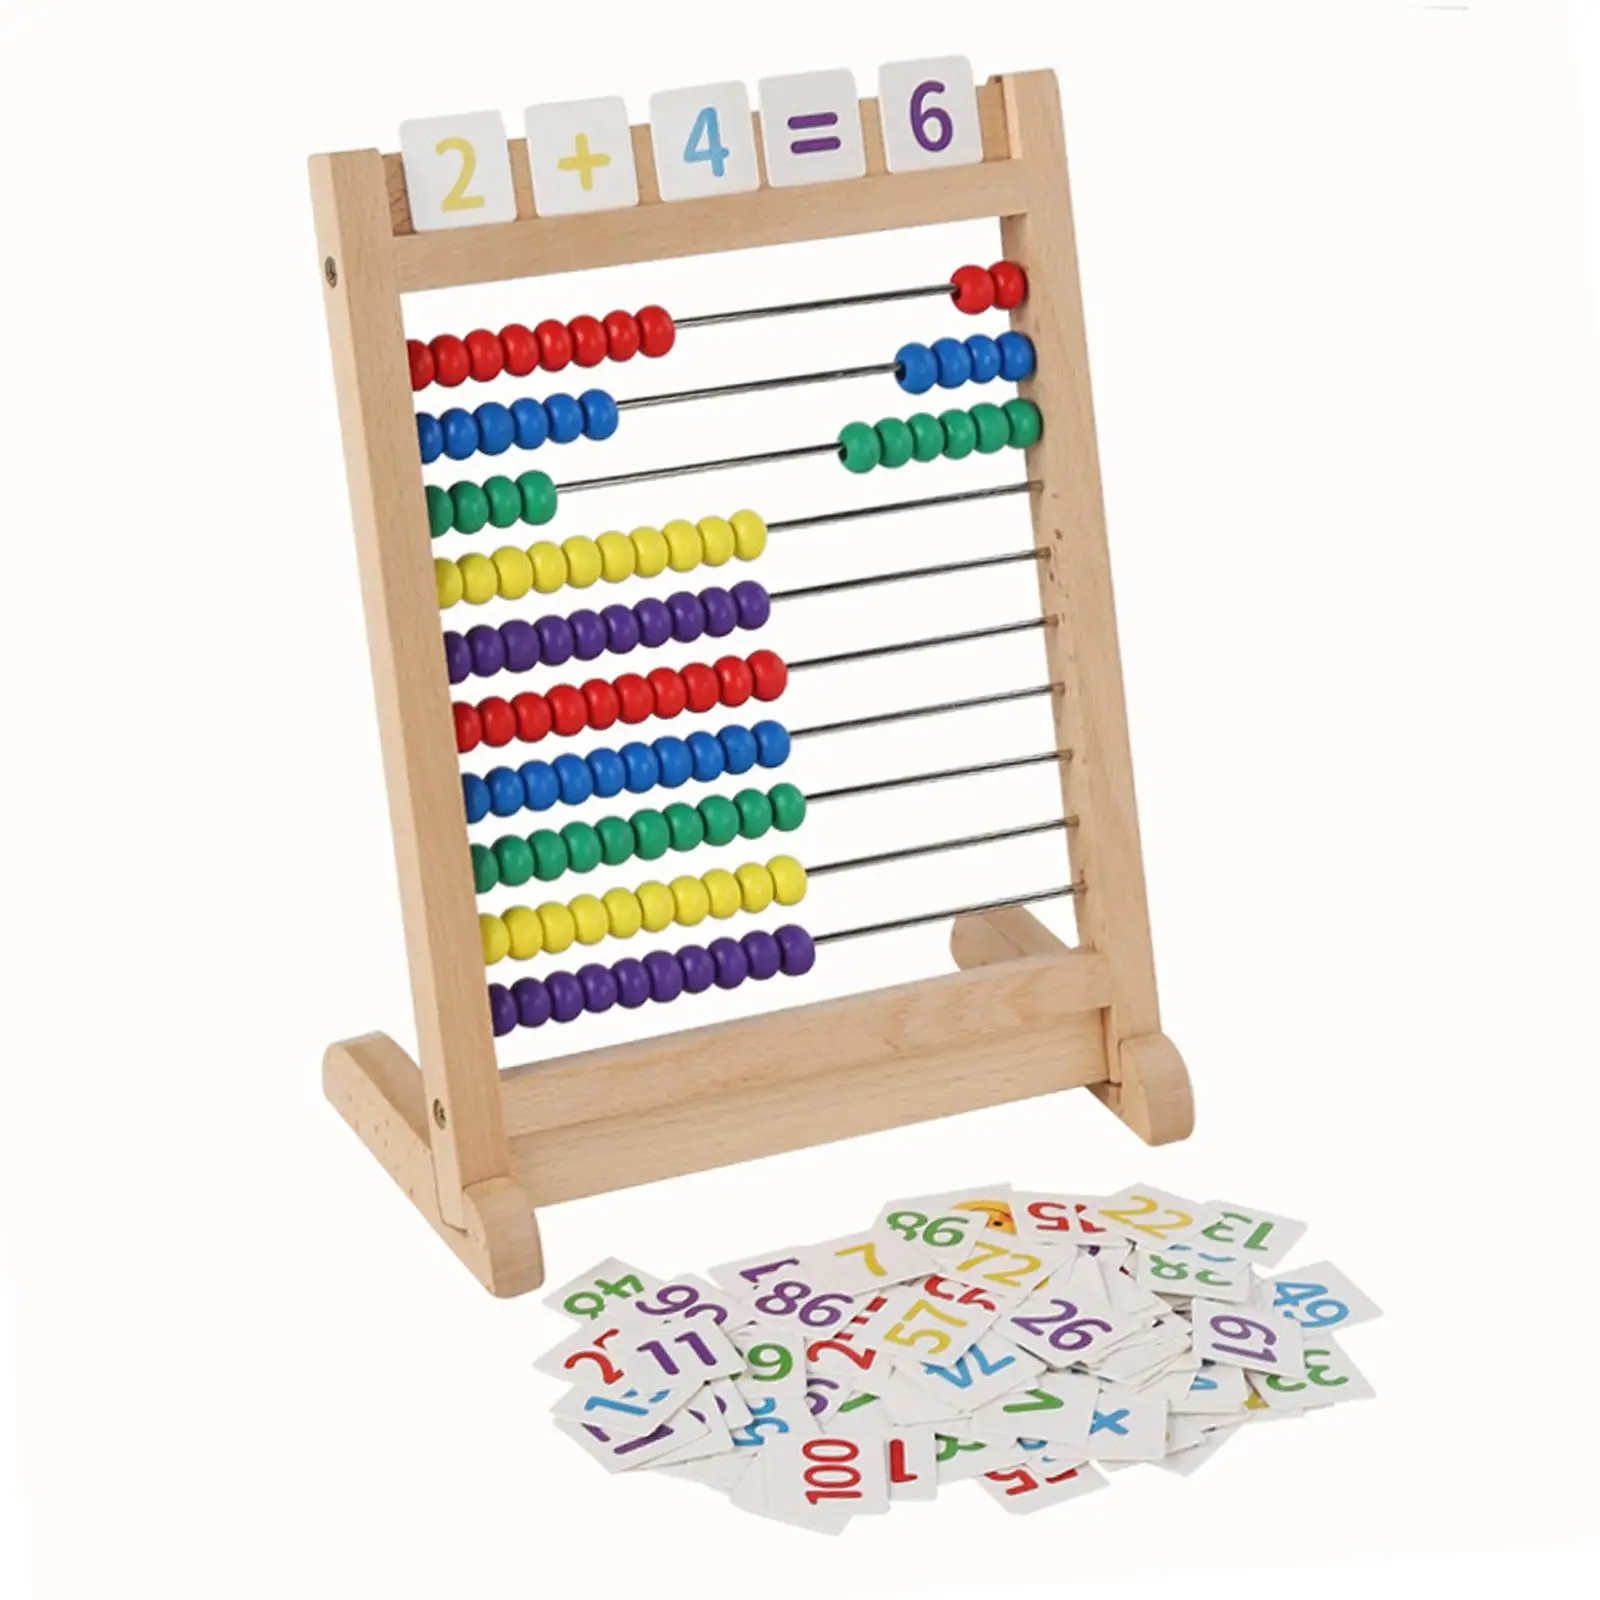 Colorful Wooden Abacus Bead Arithmetic Abacus Ten Frame Set Educational Counting Frames Toy for Kindergarten Kids Elementary